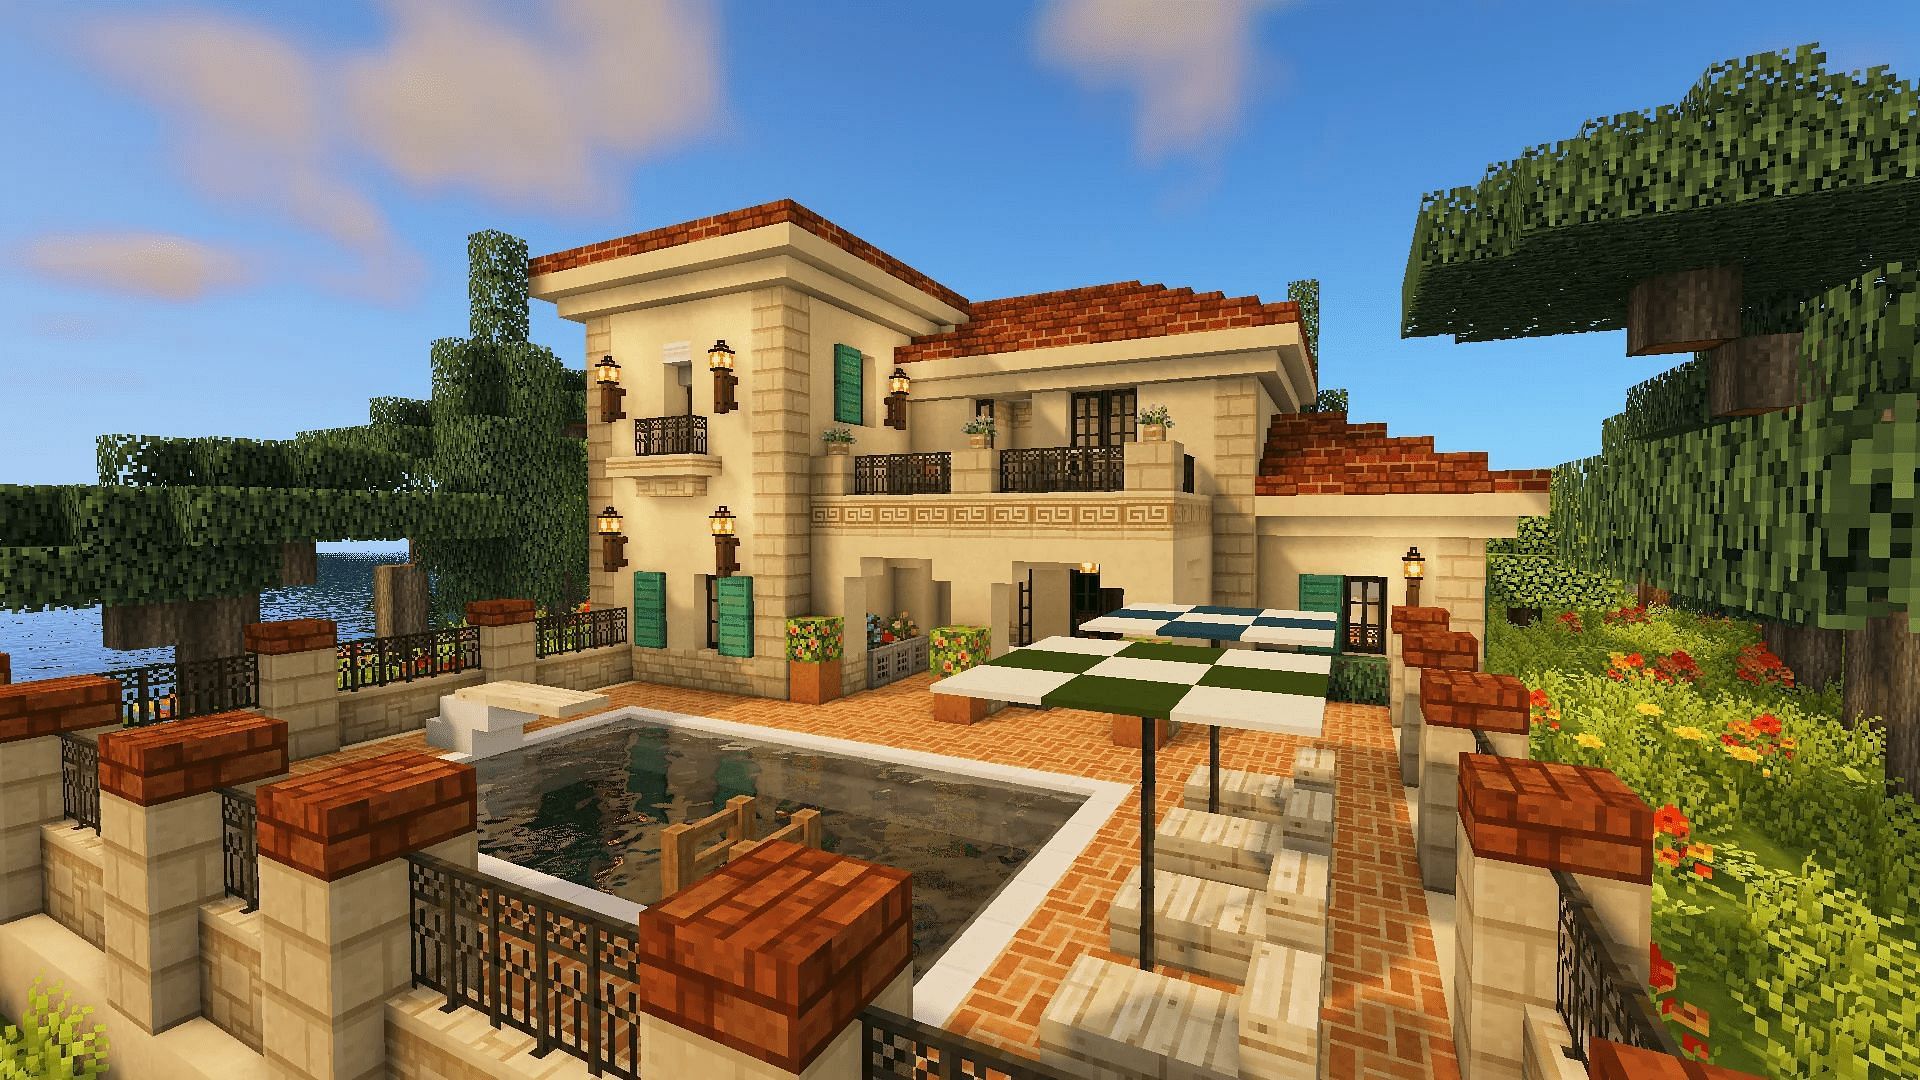 This Minecraft house build is one that exhibits extraordinary attention to detail (Image via Lindolas_MC/Reddit)